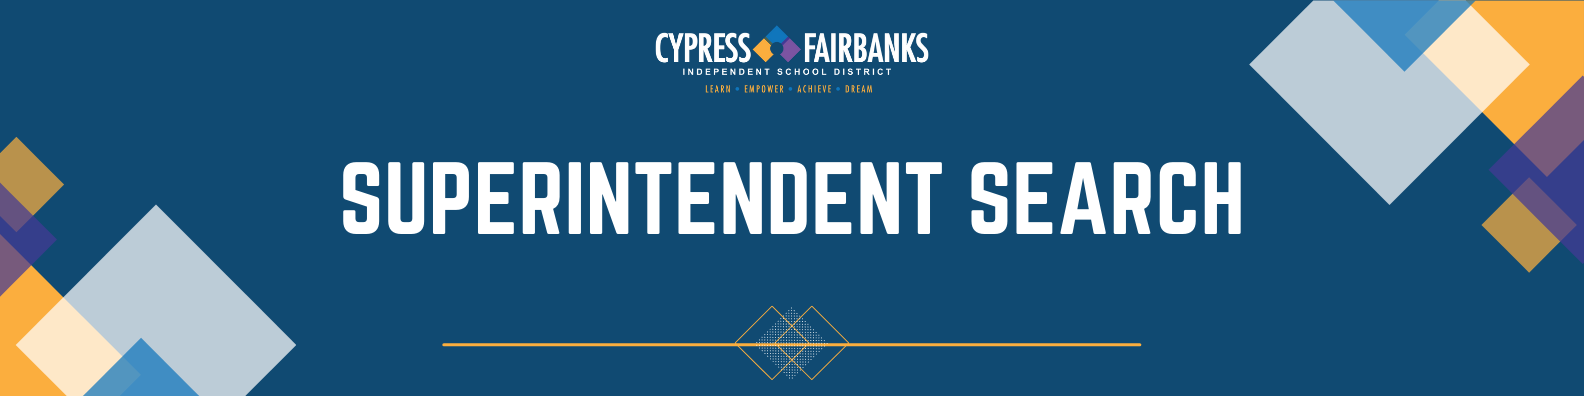 Superintendent Search for CFISD